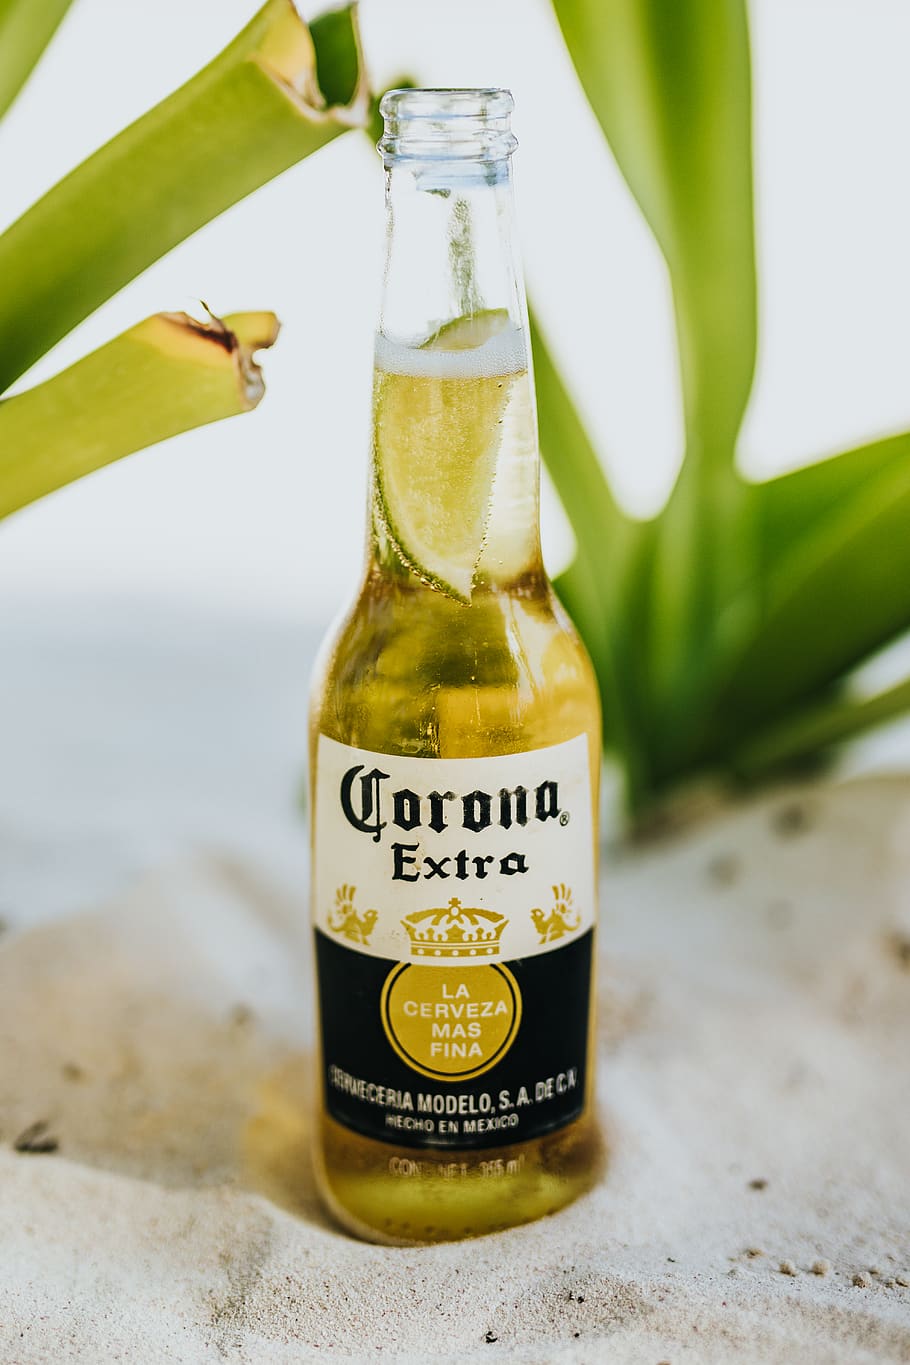 Corono Extra labeled bottle, beverage, drink, alcohol, beer, plant, HD wallpaper